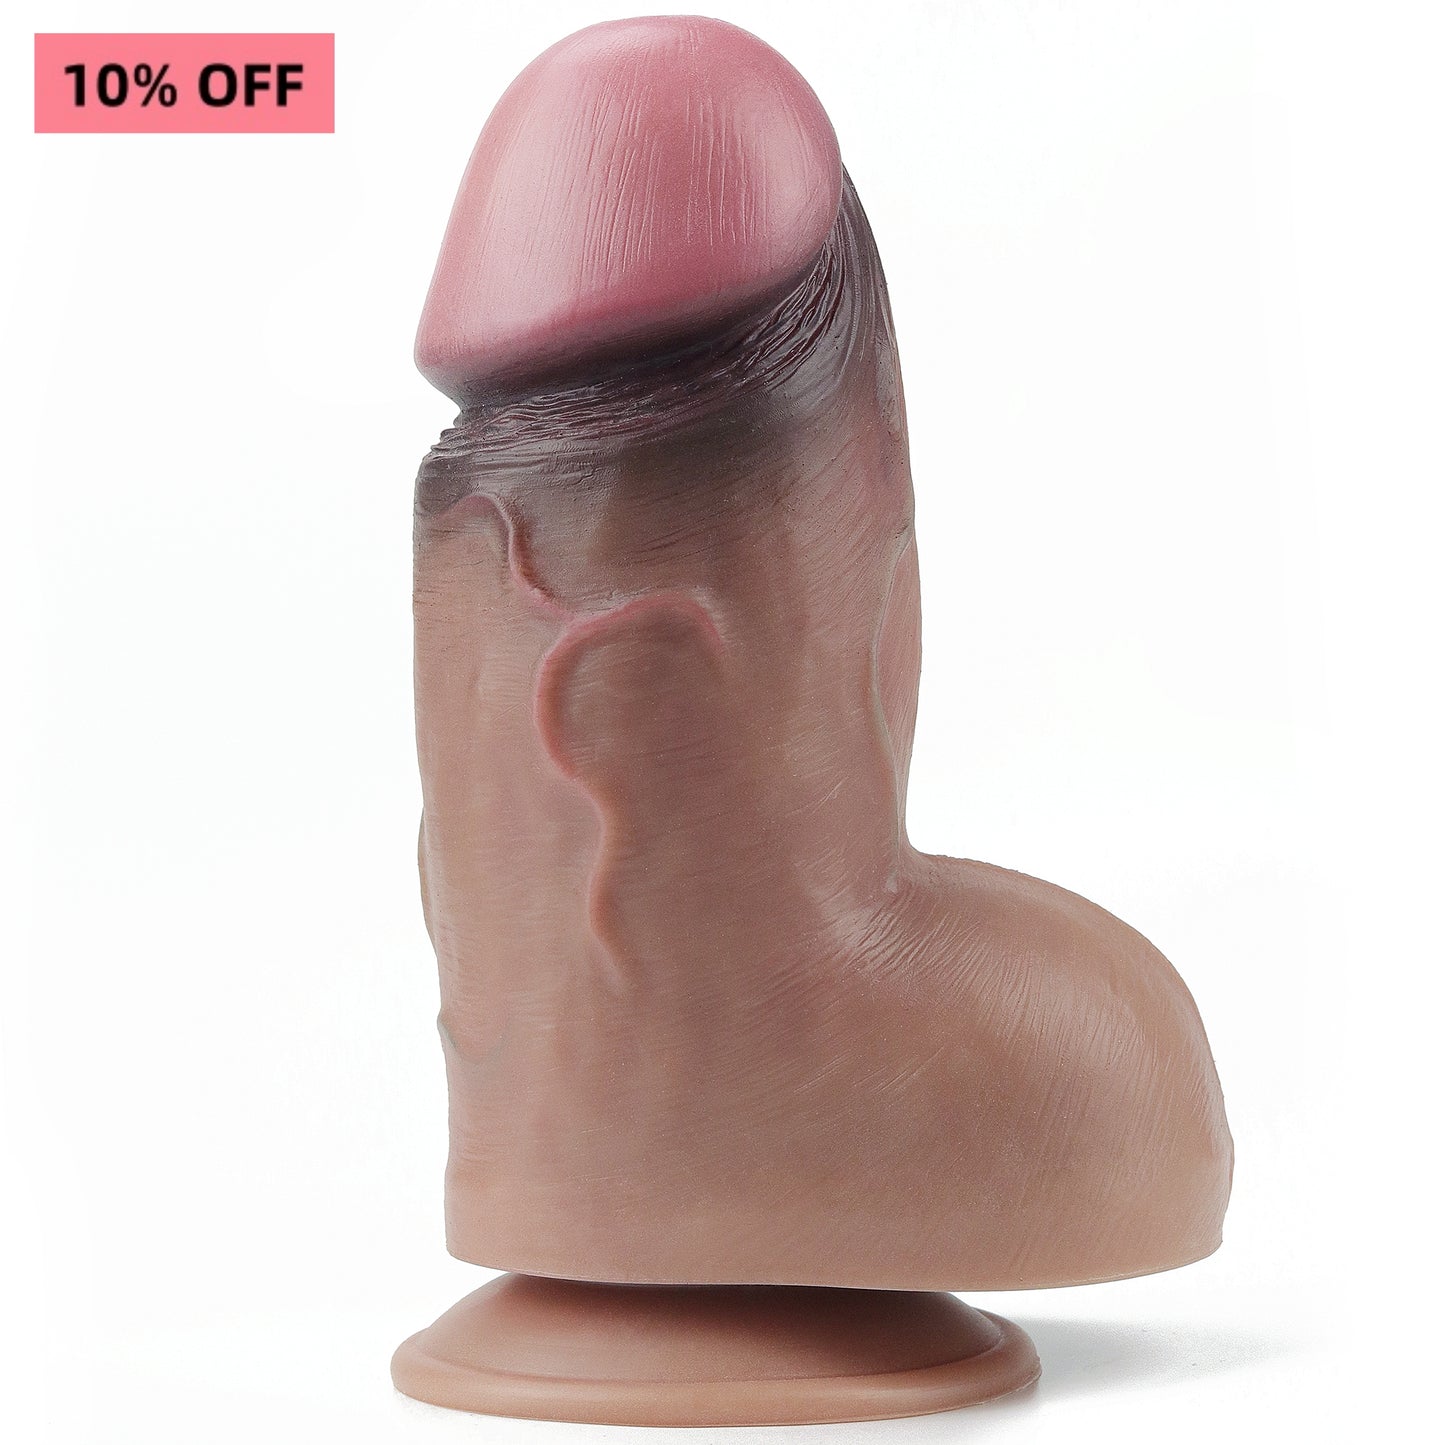 7'' Silicone Butt Plug Fat Dildo with Hyper-Realistic Veins